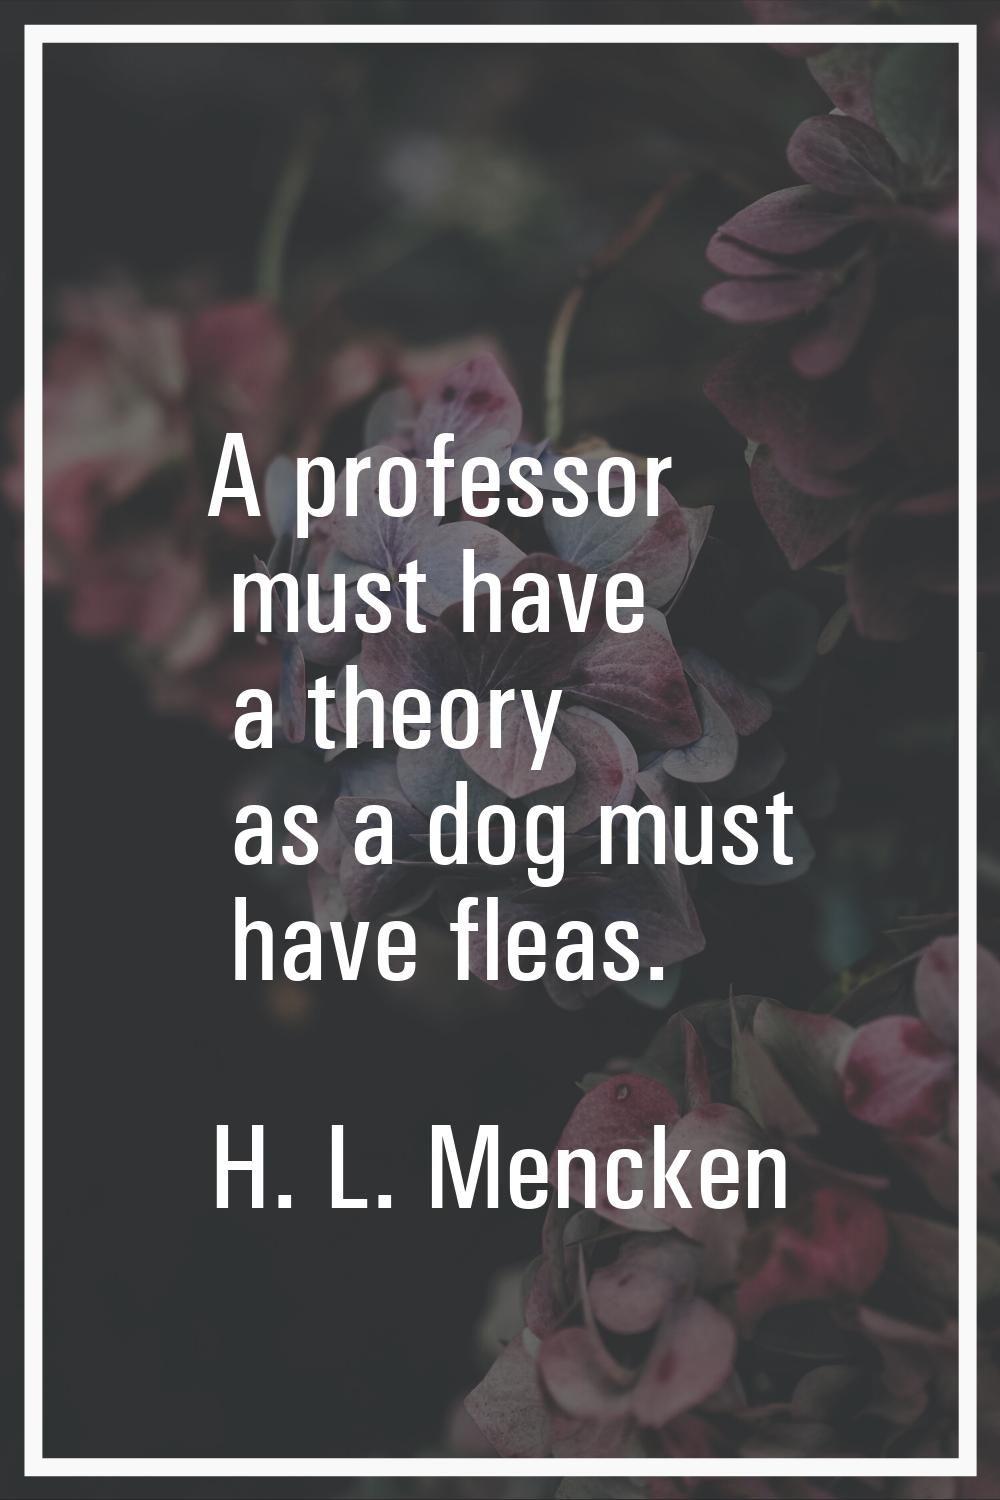 A professor must have a theory as a dog must have fleas.